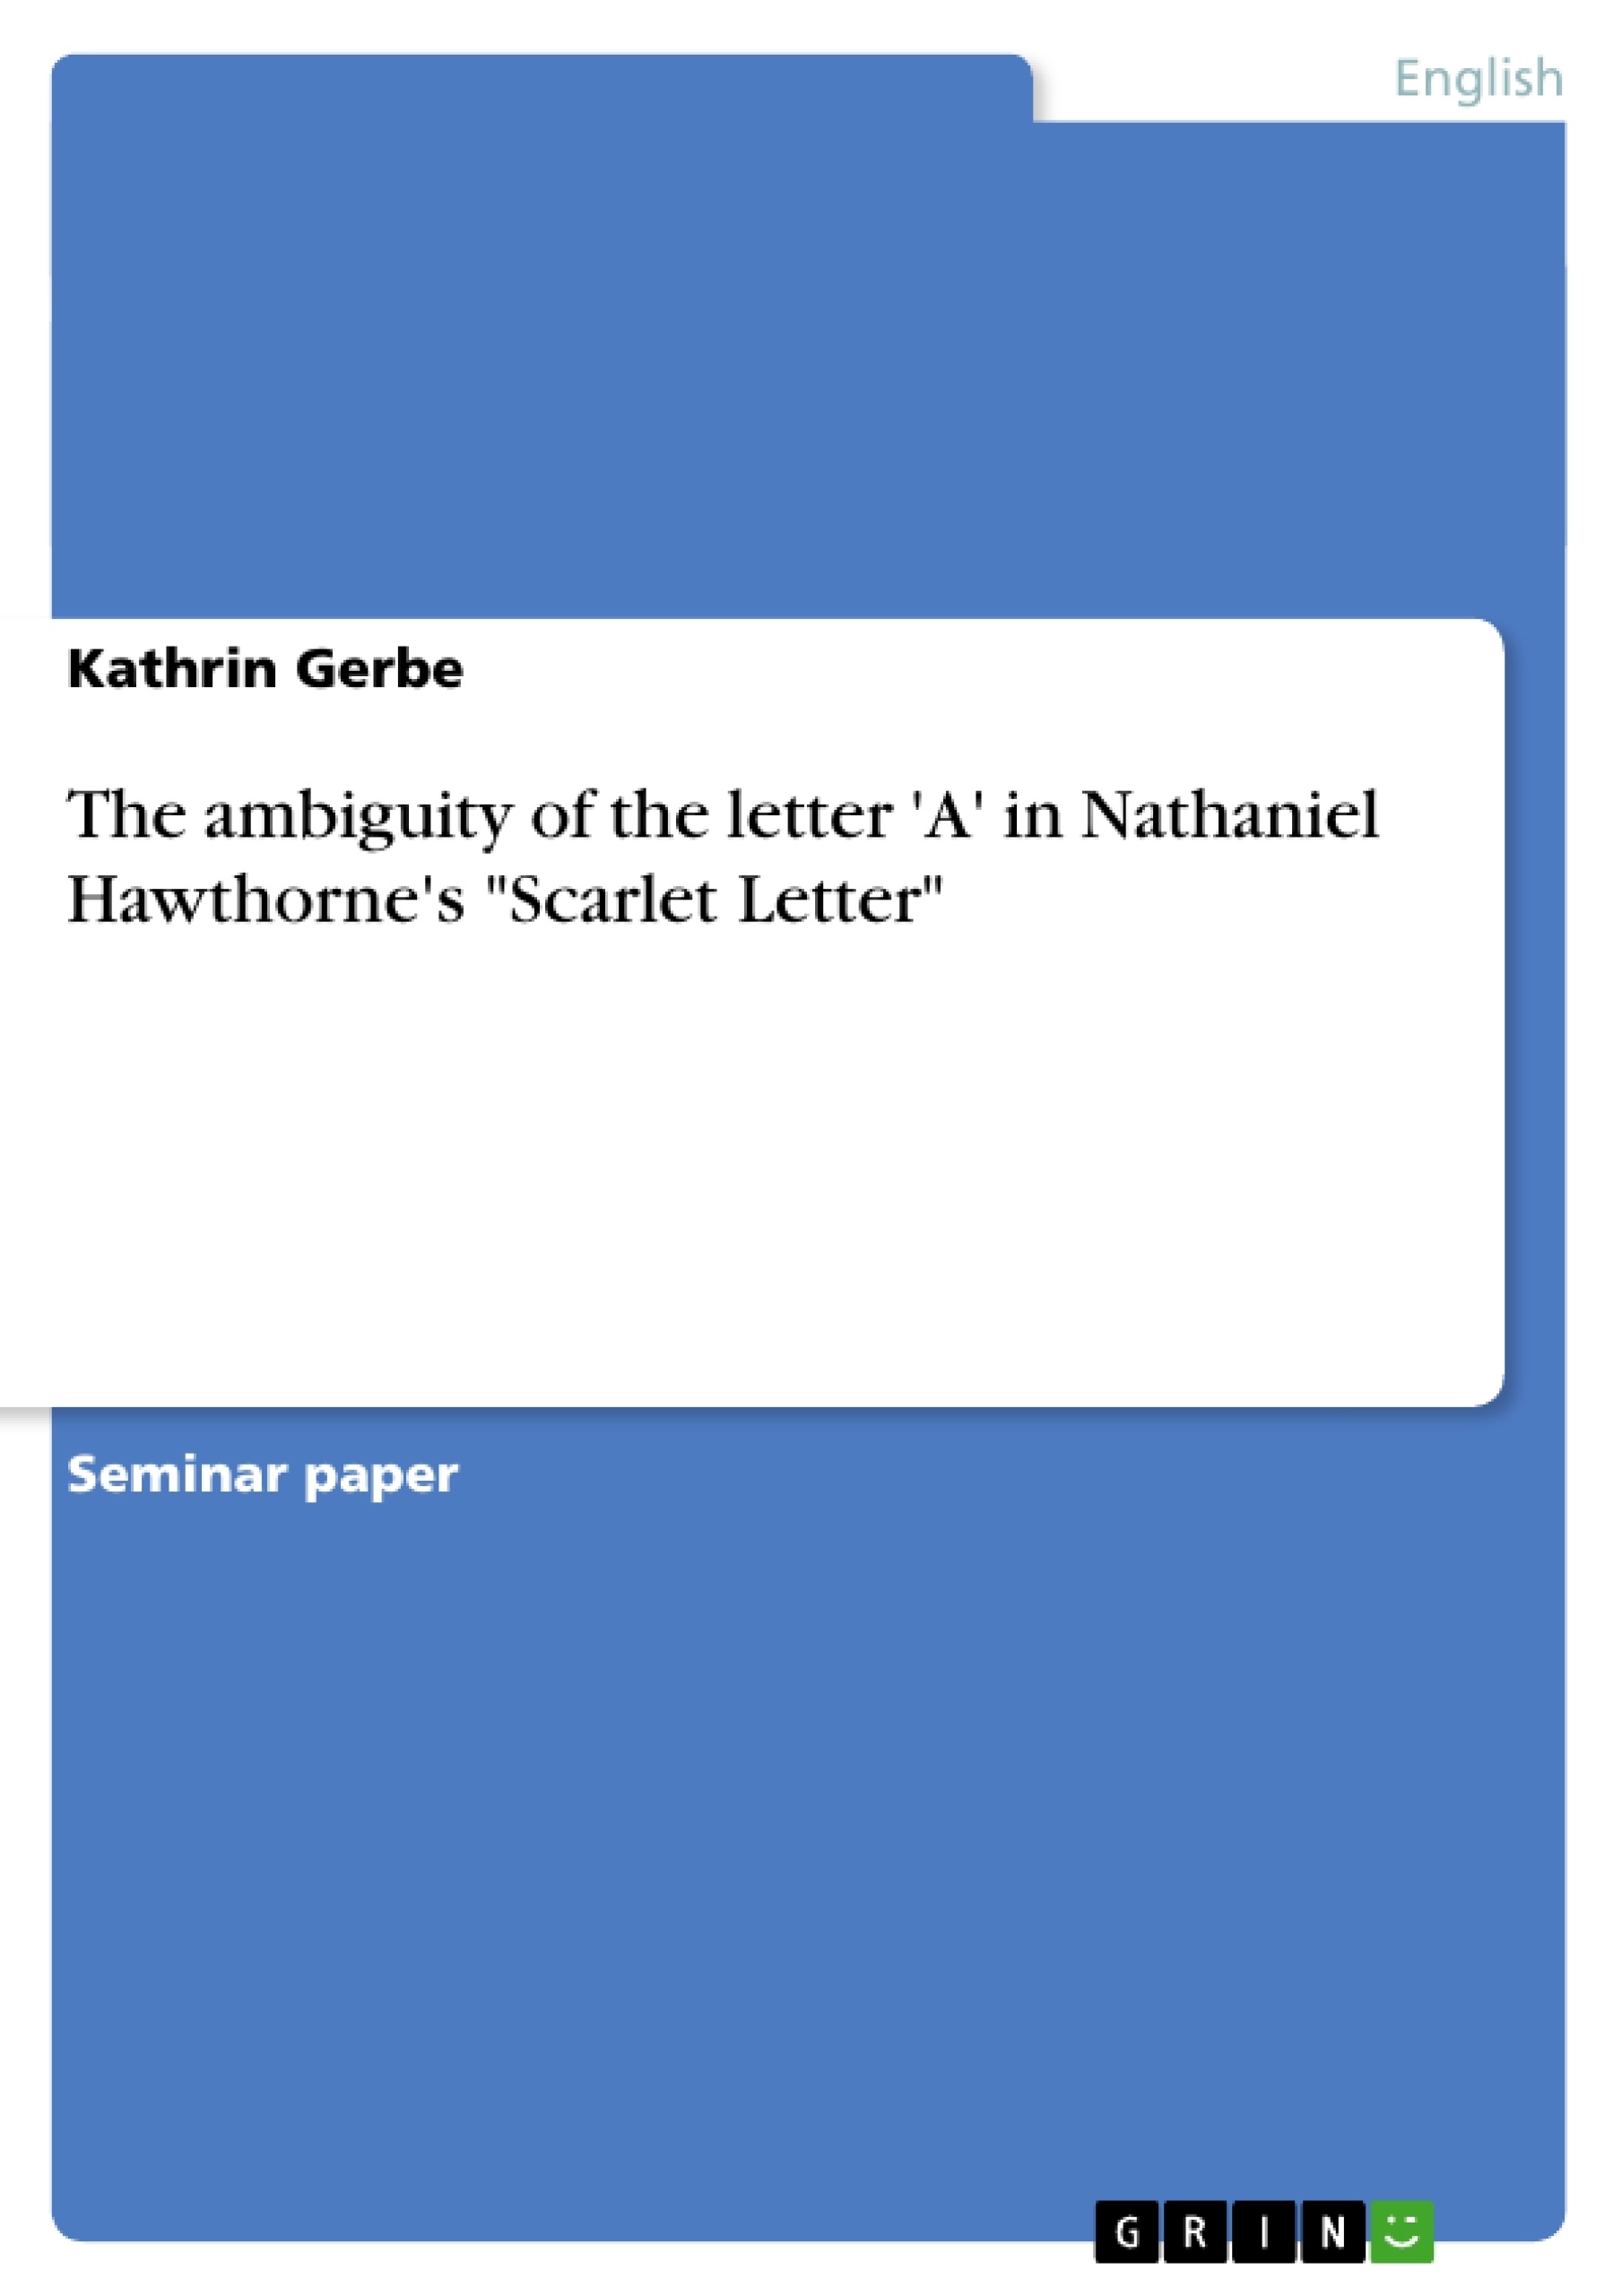 Title: The ambiguity of the letter 'A' in Nathaniel Hawthorne's "Scarlet Letter"